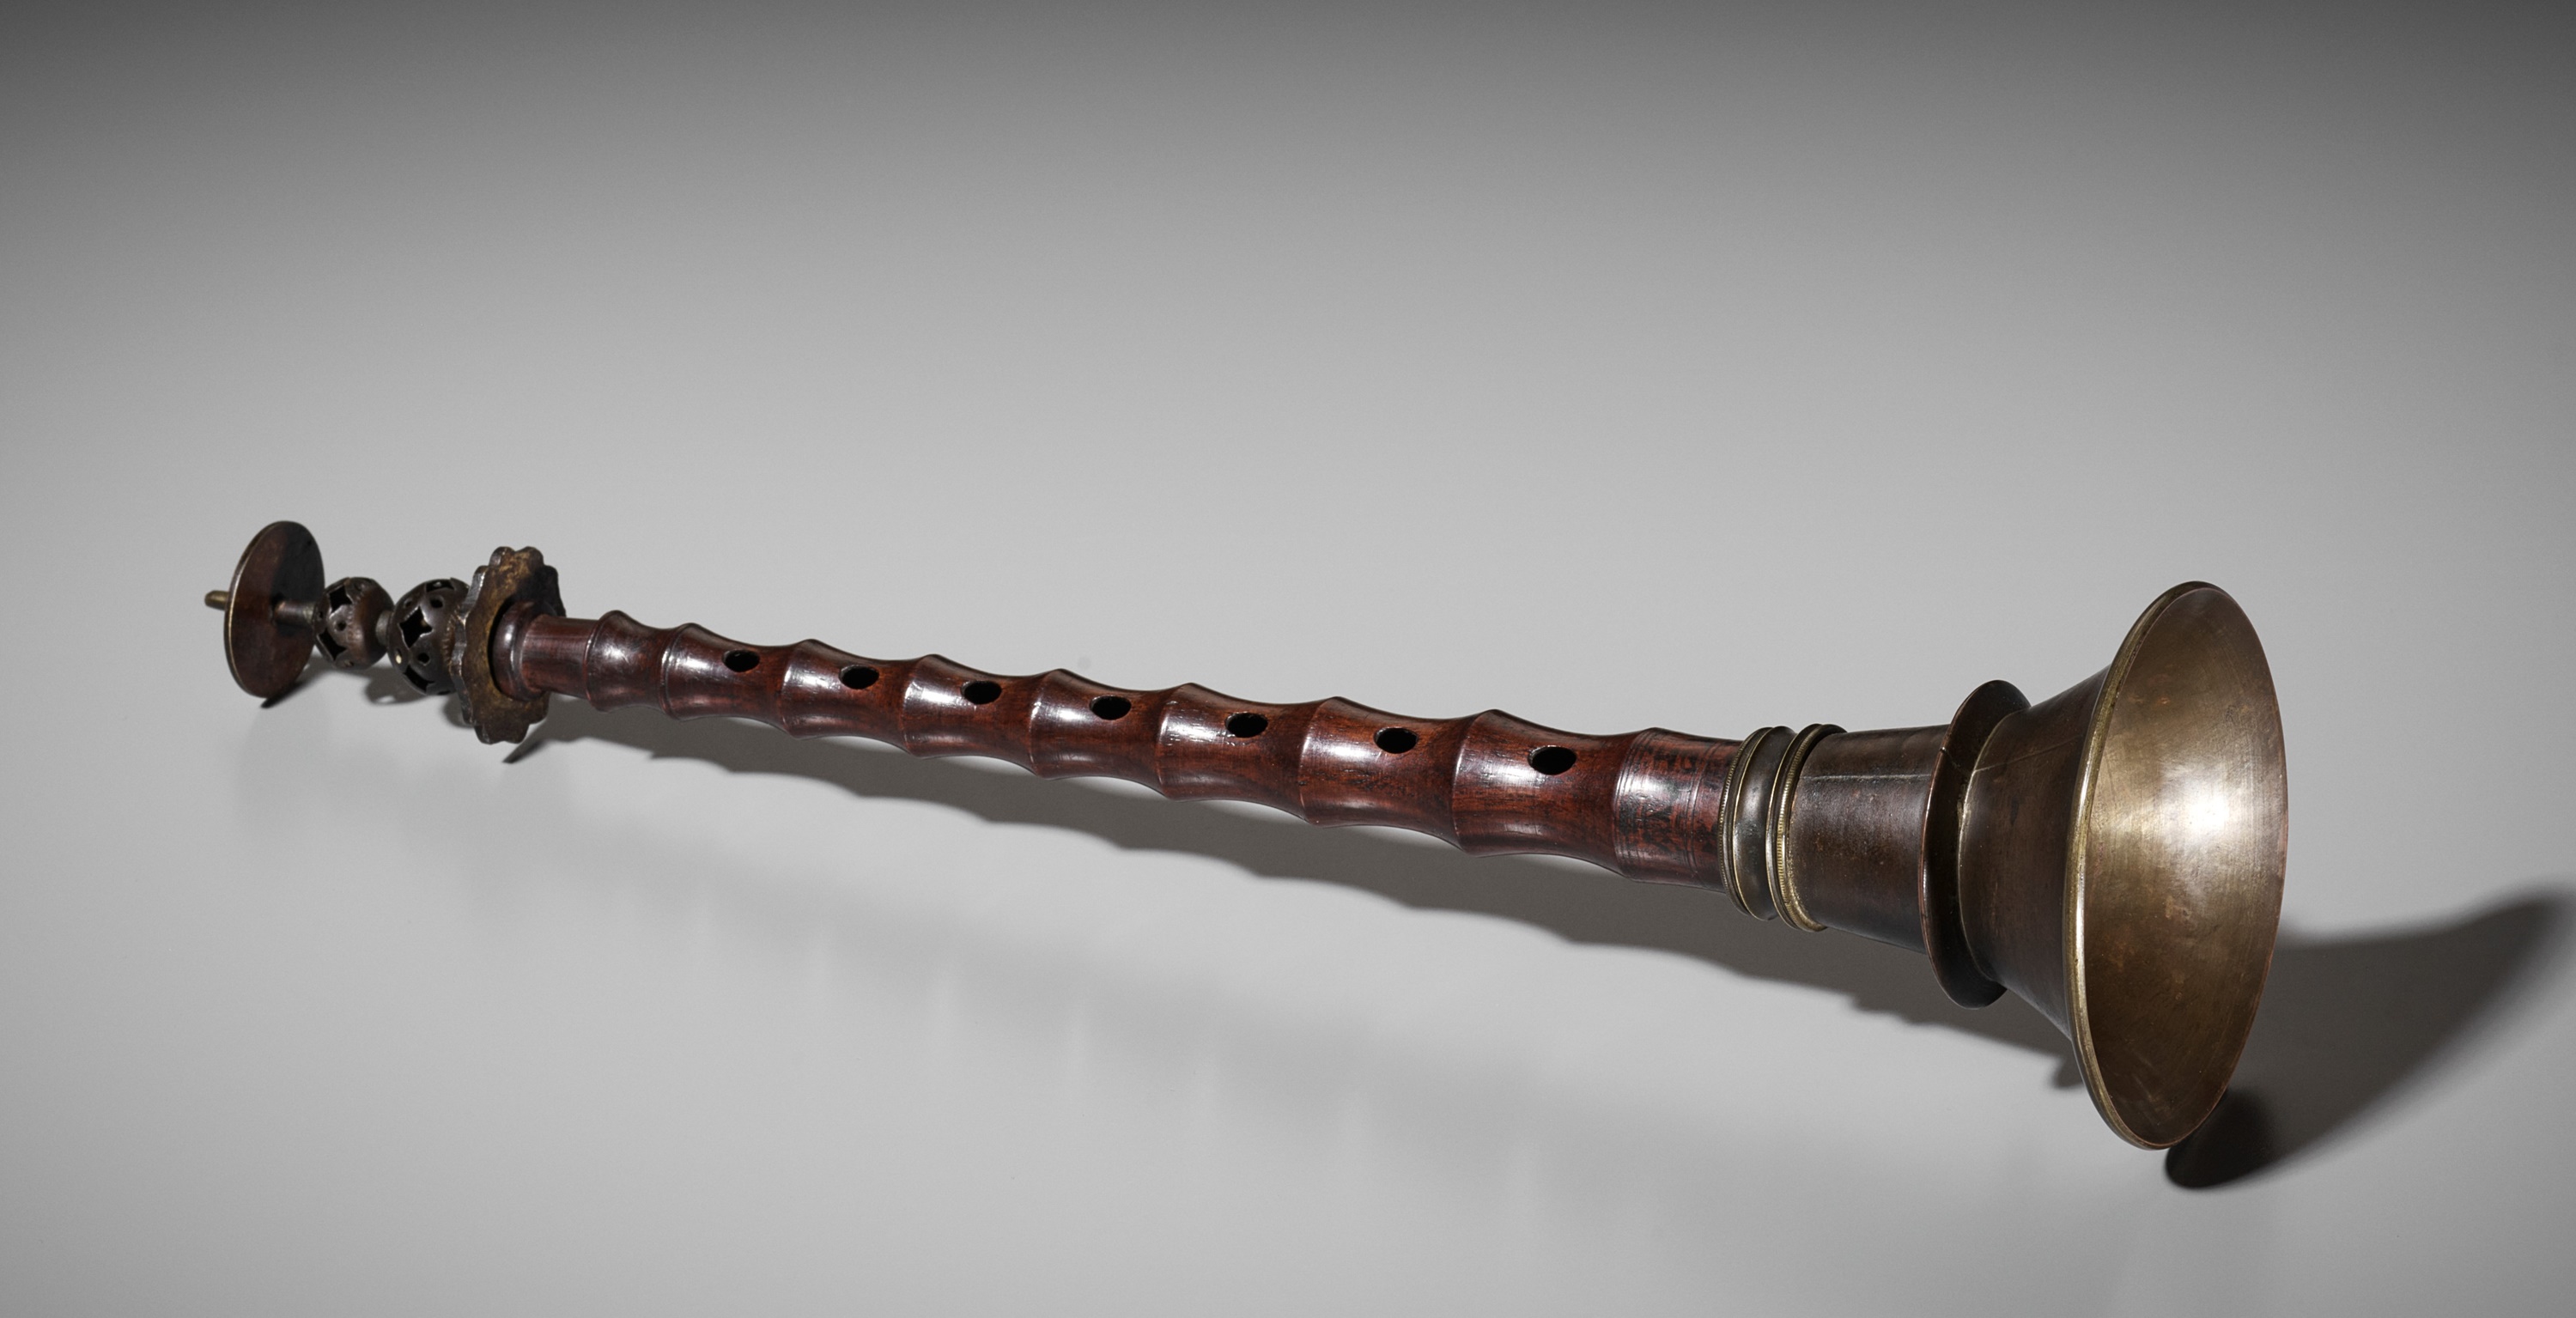 A BRASS AND WOOD OBOE, HAIDI, 18TH-19TH CENTURY